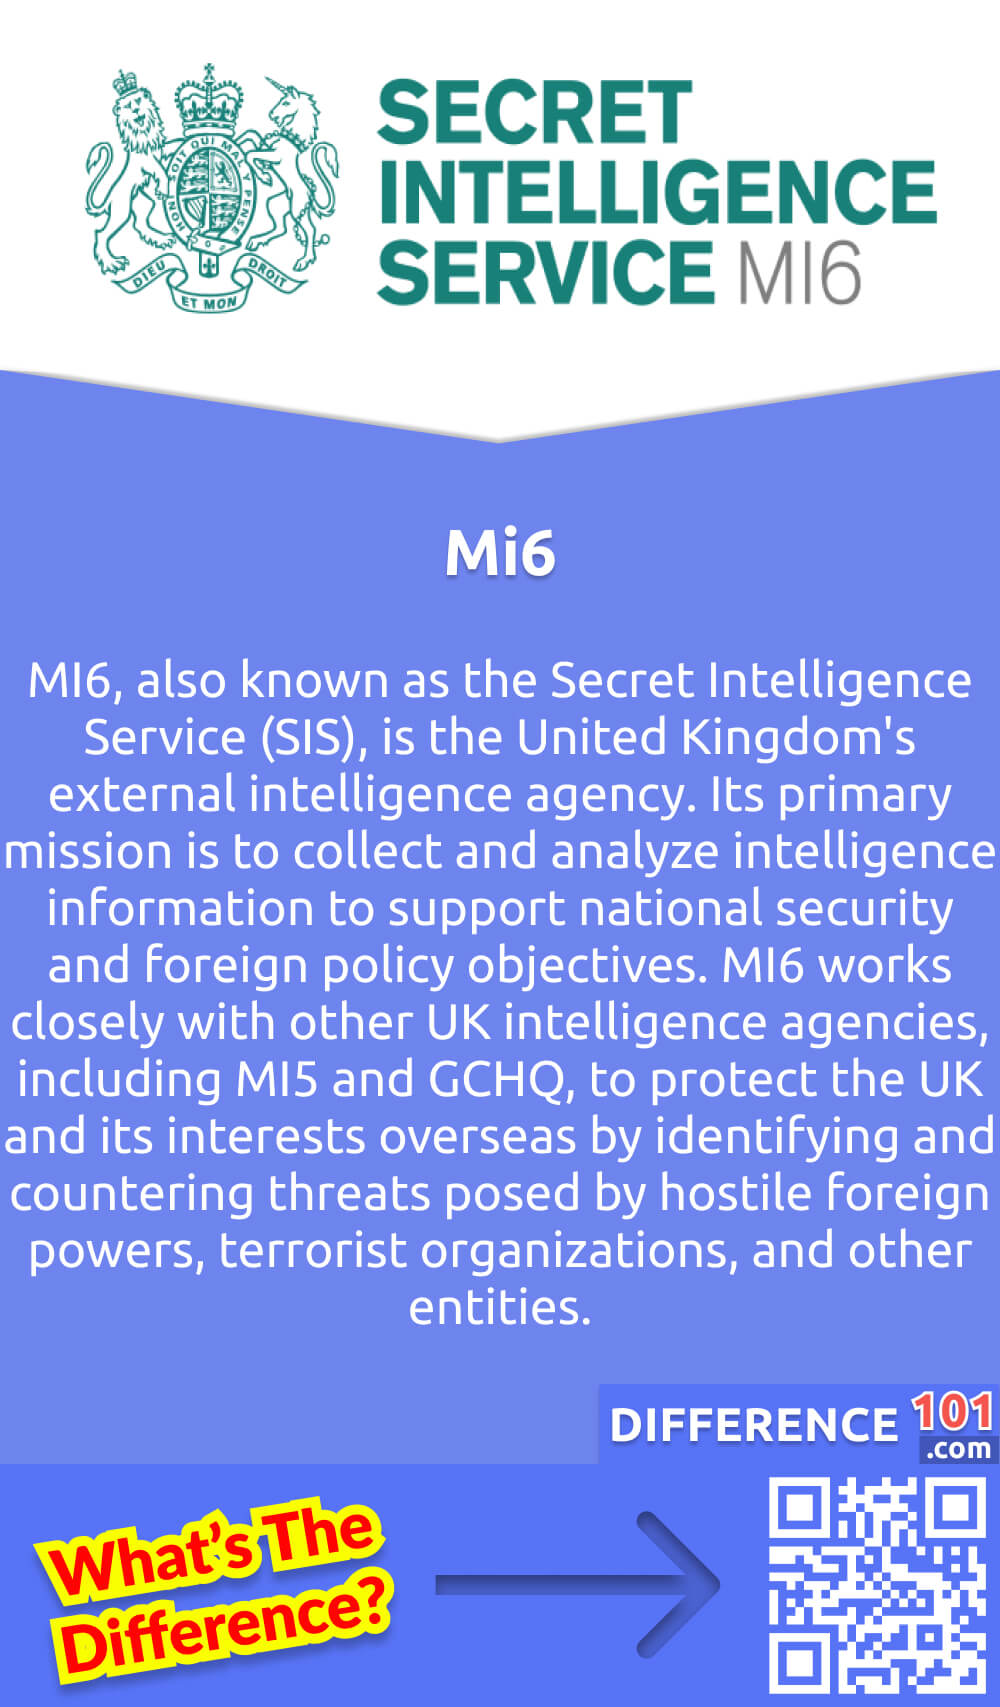 What Is Mi6? MI6, also known as the Secret Intelligence Service (SIS), is the United Kingdom's external intelligence agency. Its primary mission is to collect and analyze intelligence information to support national security and foreign policy objectives. MI6 works closely with other UK intelligence agencies, including MI5 and GCHQ, to protect the UK and its interests overseas by identifying and countering threats posed by hostile foreign powers, terrorist organizations, and other entities. The agency operates globally and employs agents, analysts, and specialists with diverse expertise in areas such as espionage, counter-terrorism, cyber security, and international relations. MI6 operates under strict legal and ethical guidelines to ensure that its activities are conducted lawfully and in accordance with democratic values.